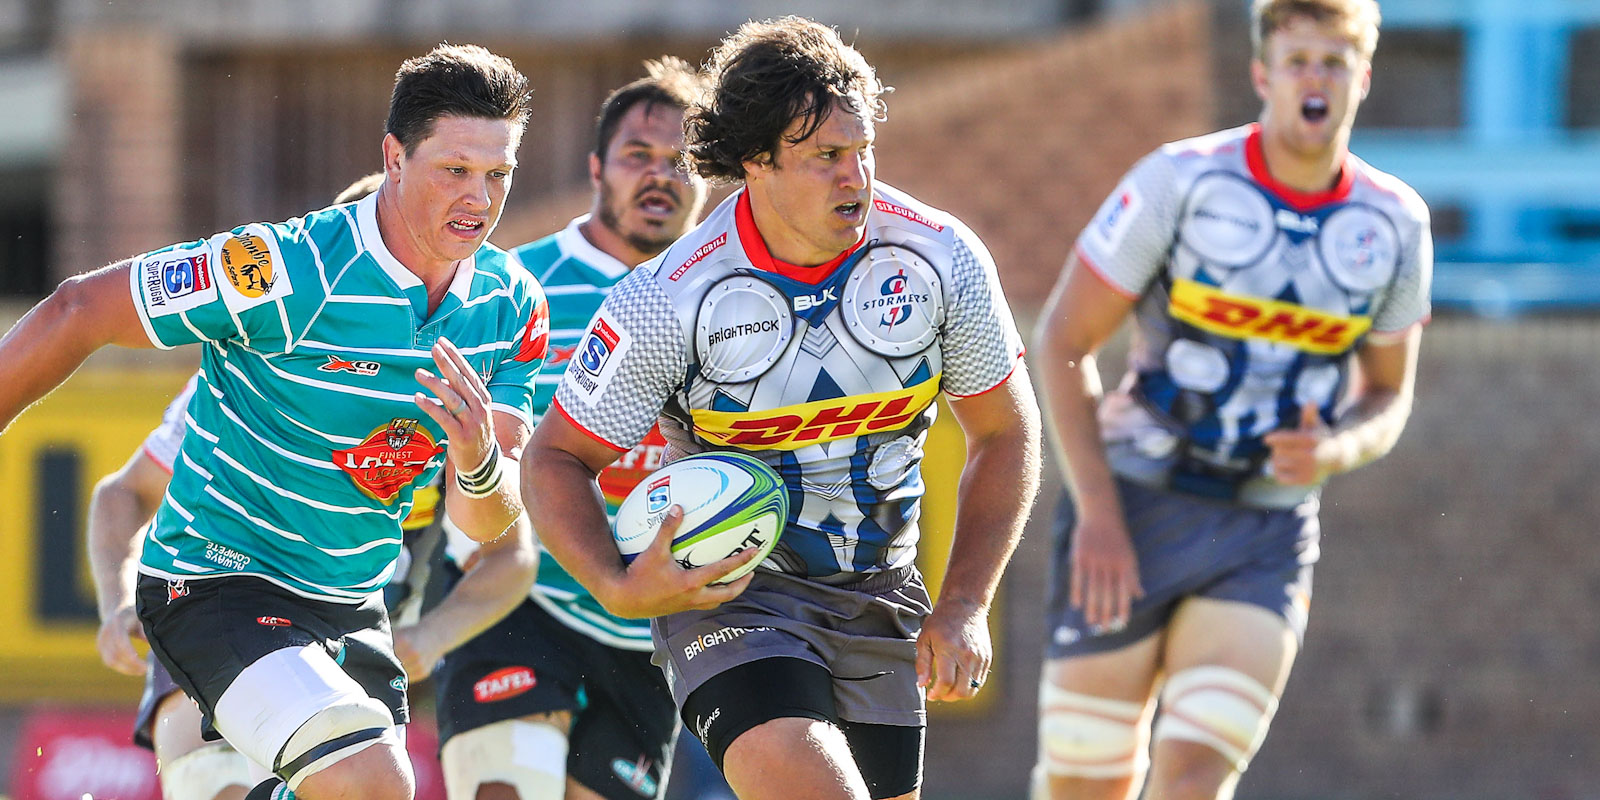 Neethling Fouche was one of the DHL Stormers' try-scorers.